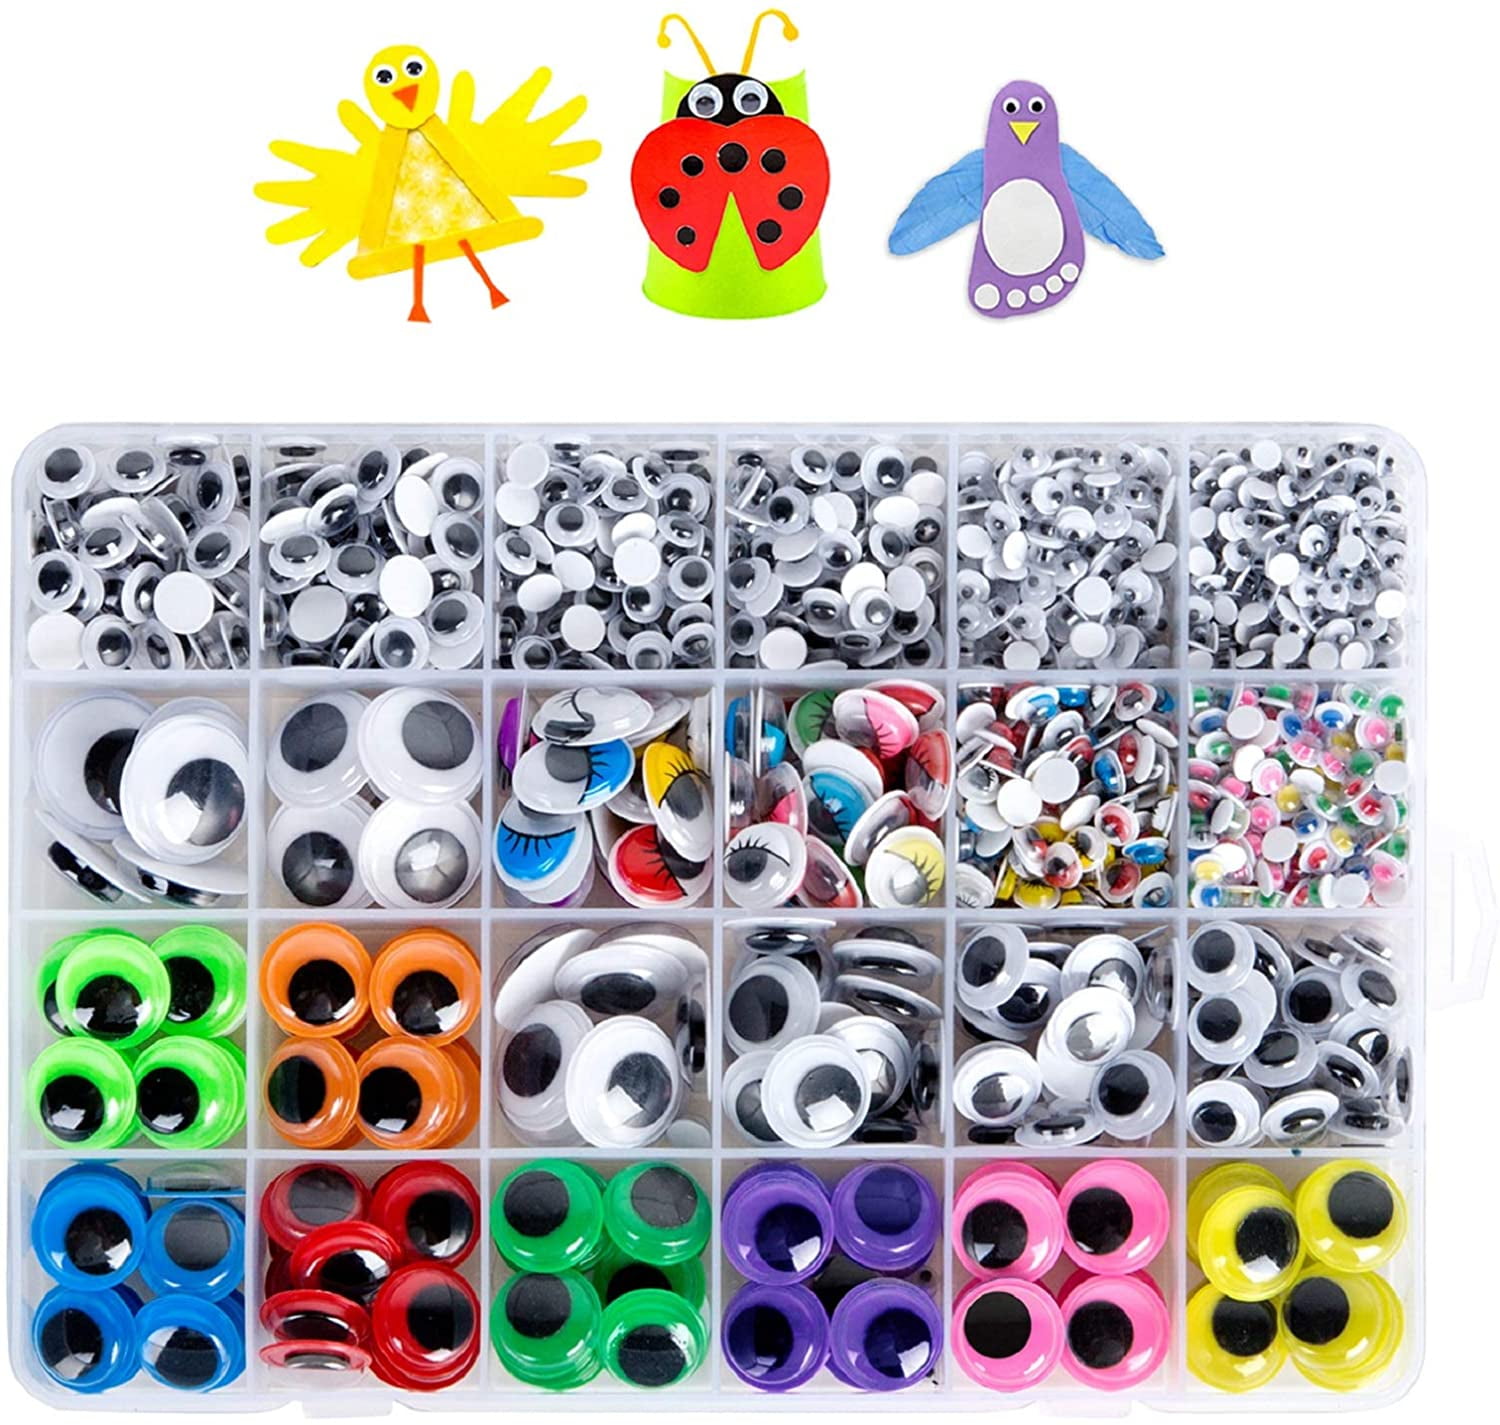 Colorations® Self-Adhesive Wiggly Eyes - 1,000 Pieces